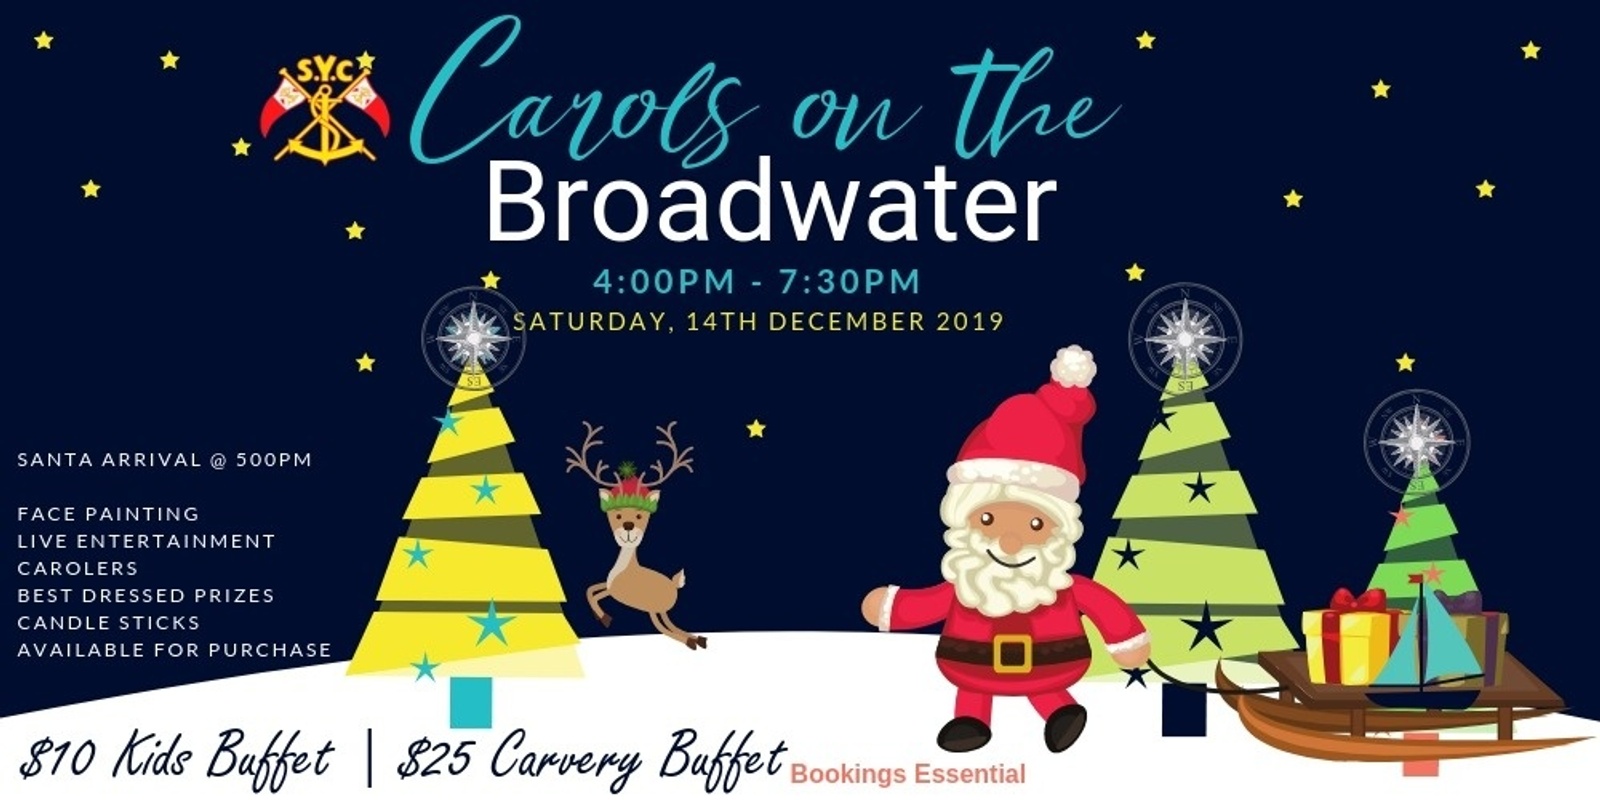 Banner image for 2019 Carols on the Broadwater